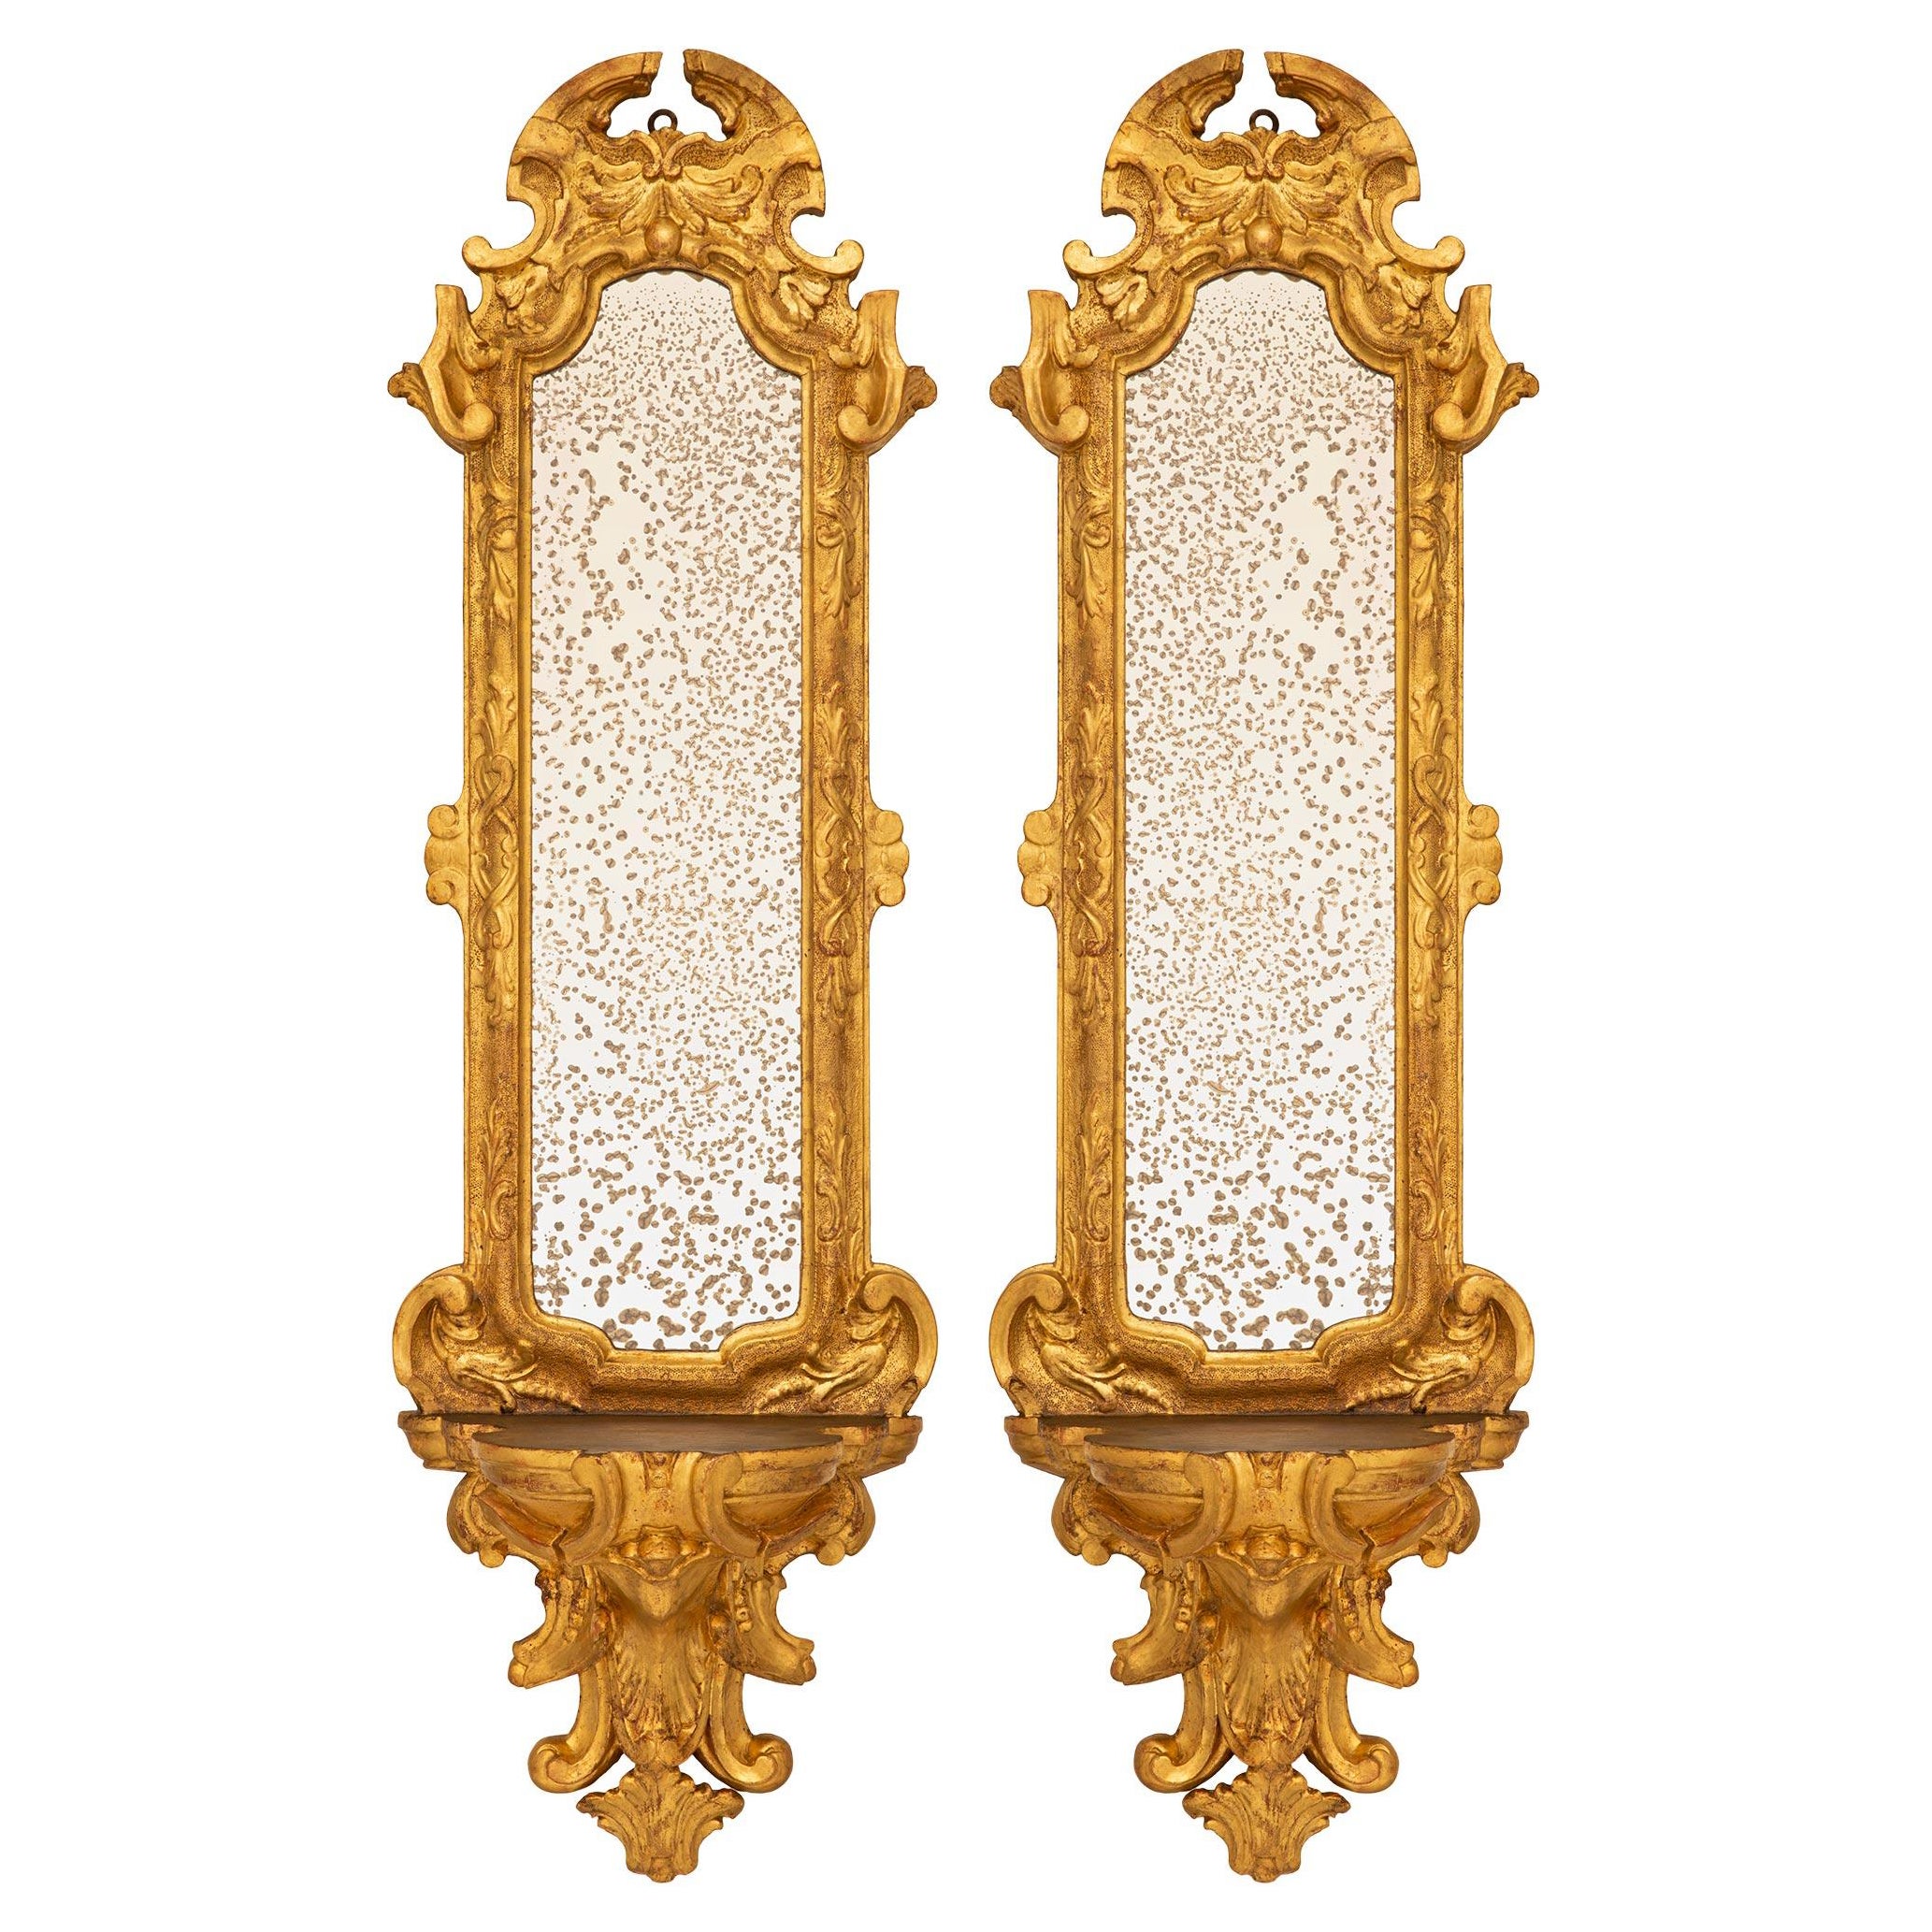 pair of Italian 17th century Baroque period Giltwood mirrored wall brackets For Sale